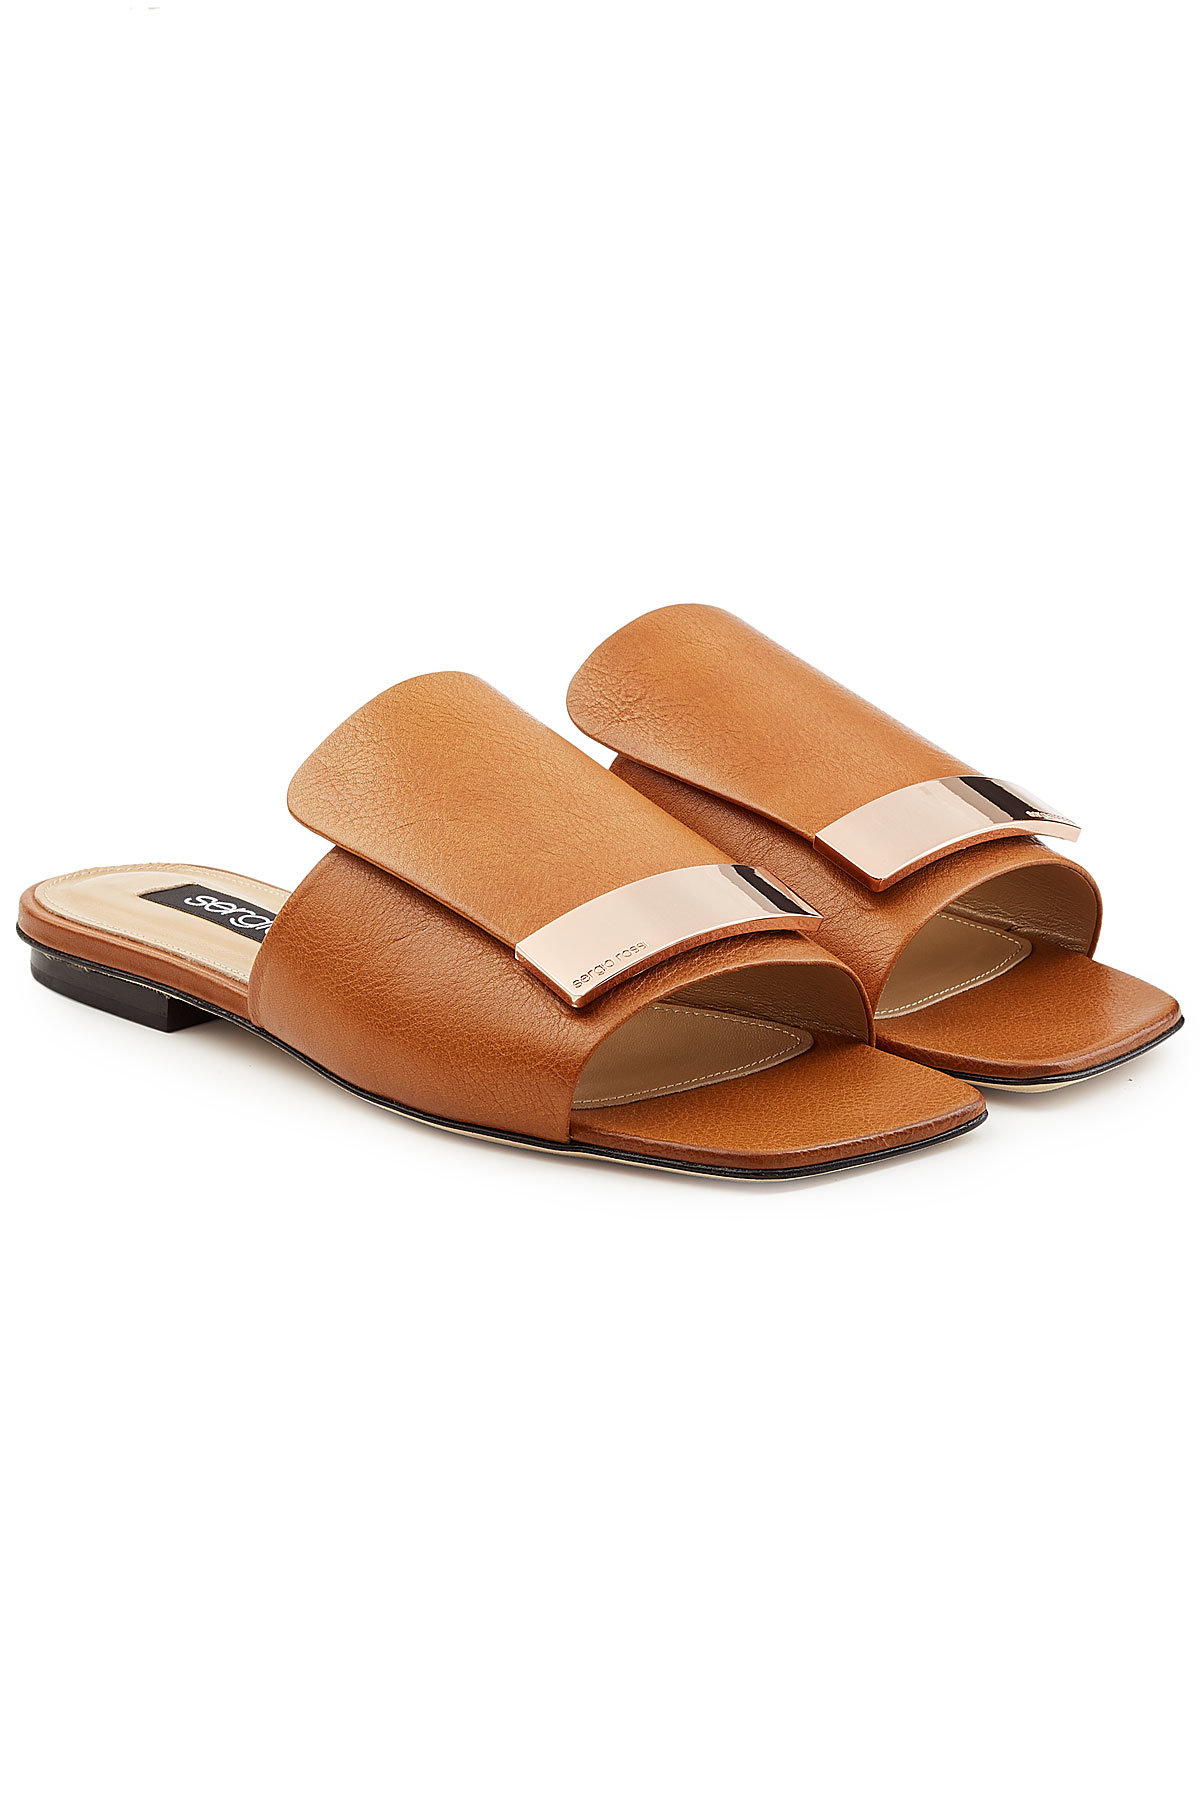 Slip-On Leather Sandals by Sergio Rossi